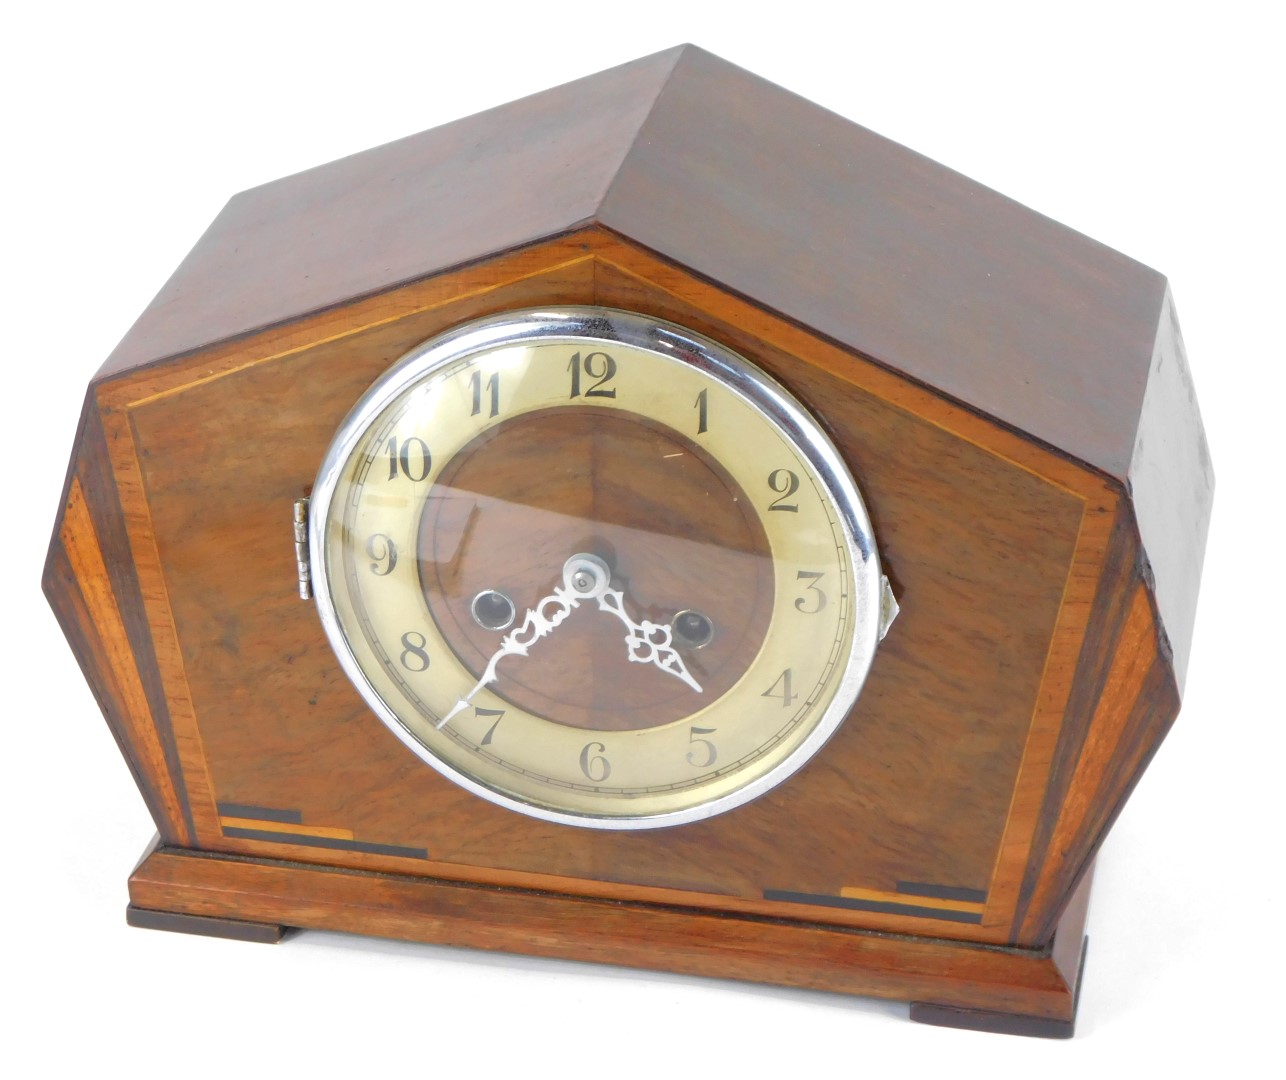 A 1950s Art Deco style walnut cased mantel clock, with a moulded case with fan banding, cream dial b